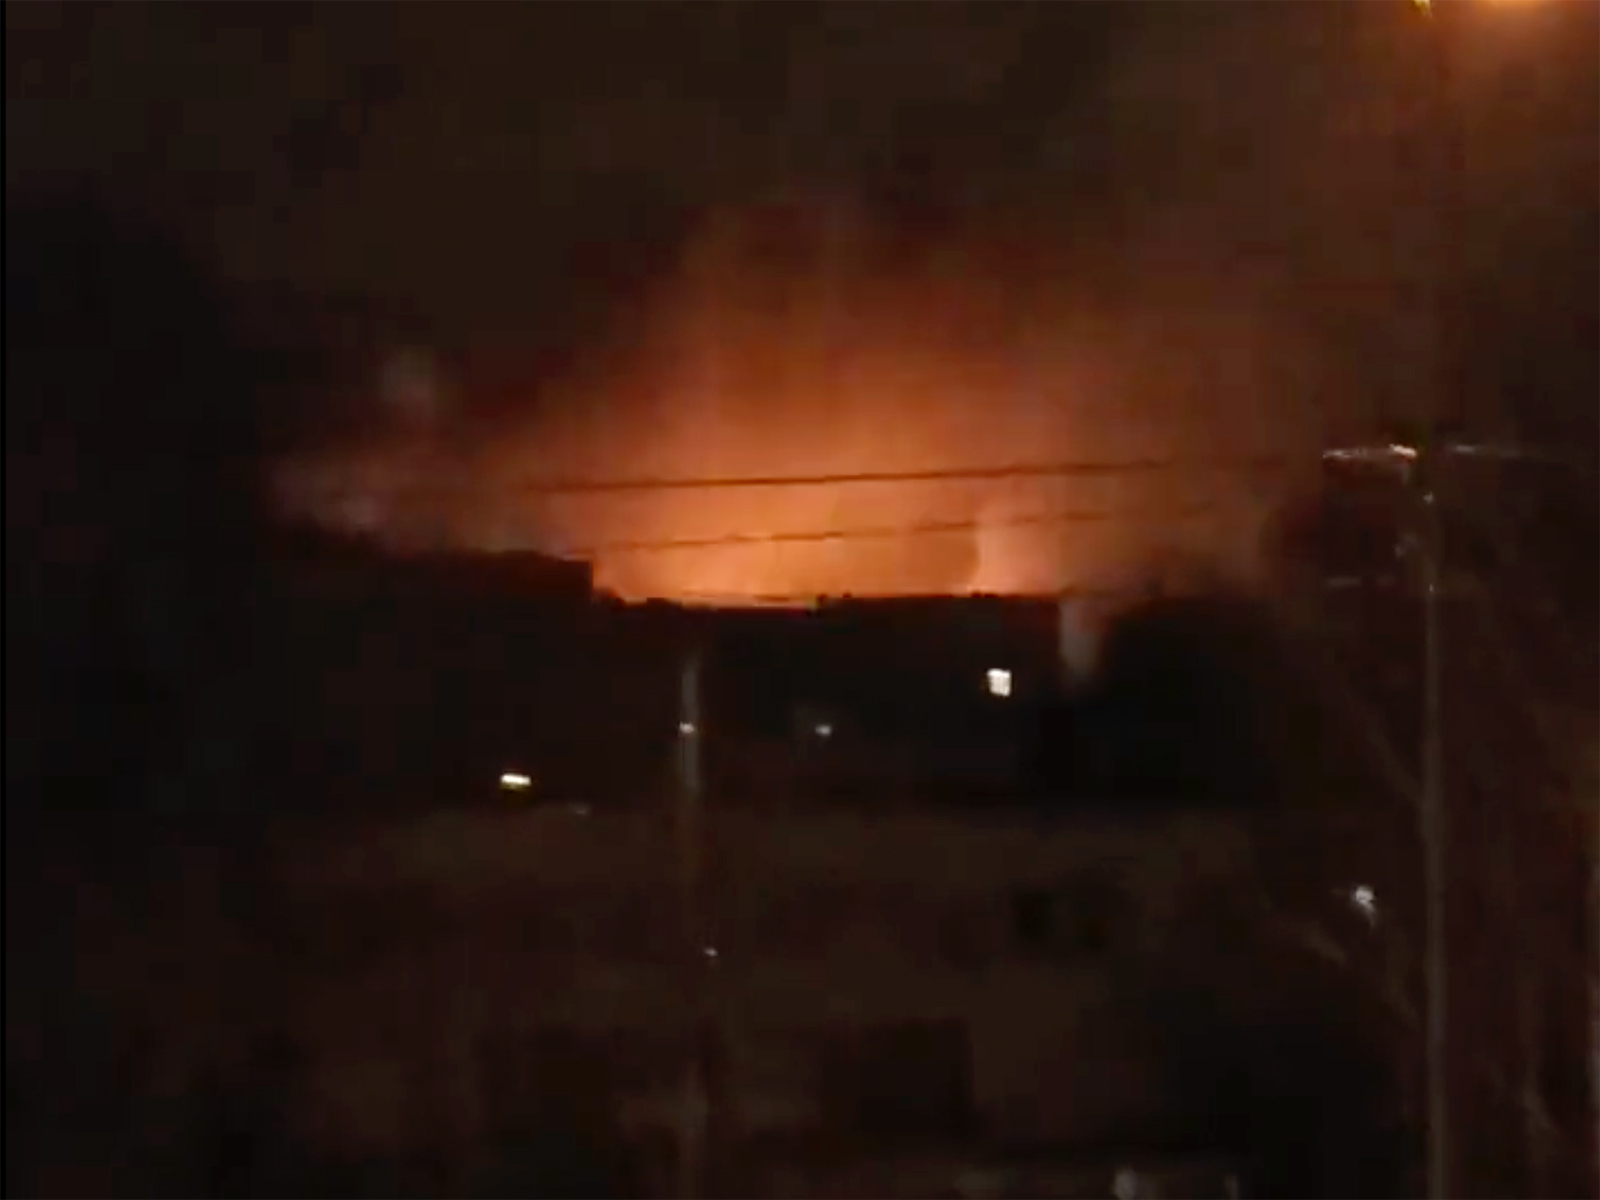 A frame taken from a video shared on Twitter shows explosions purportedly taken near the Kyiv Zoo.